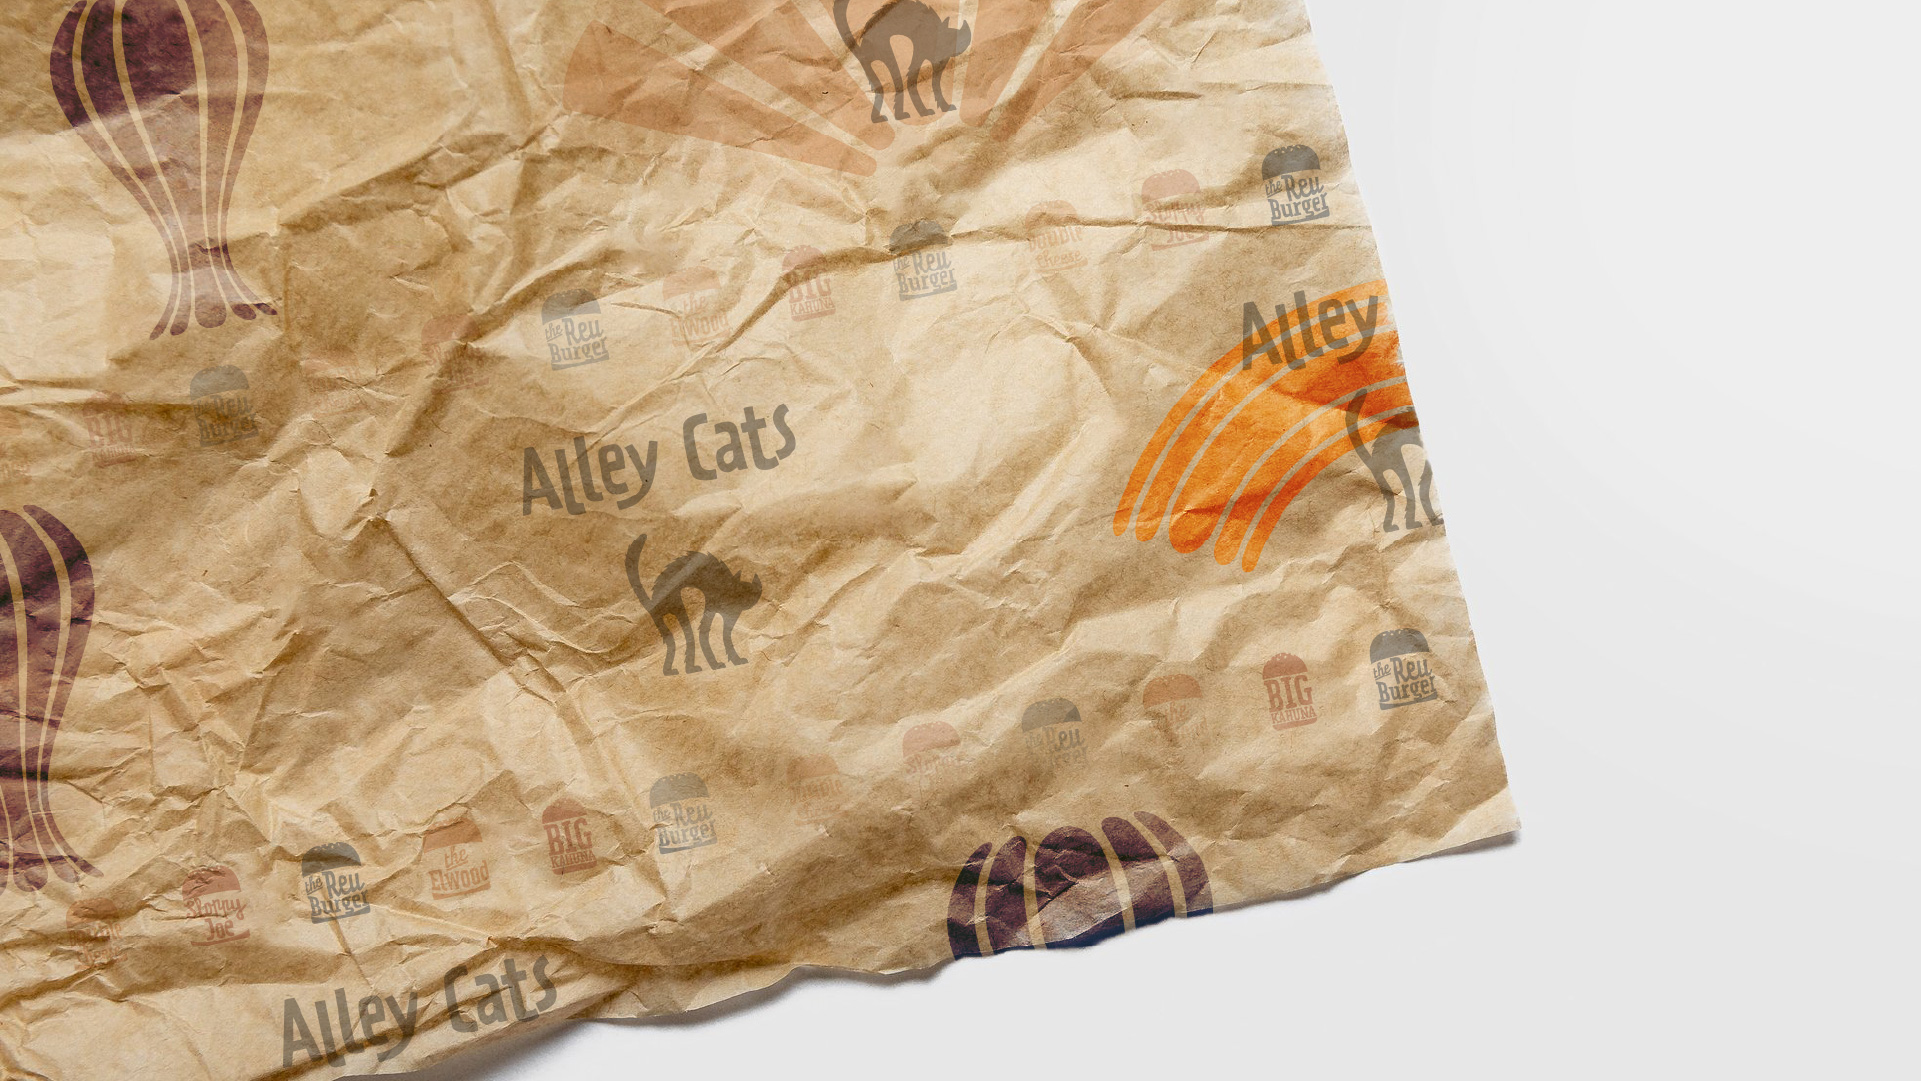 Branded and printed wrapping paper containing the alley cats logo and brand visual assets